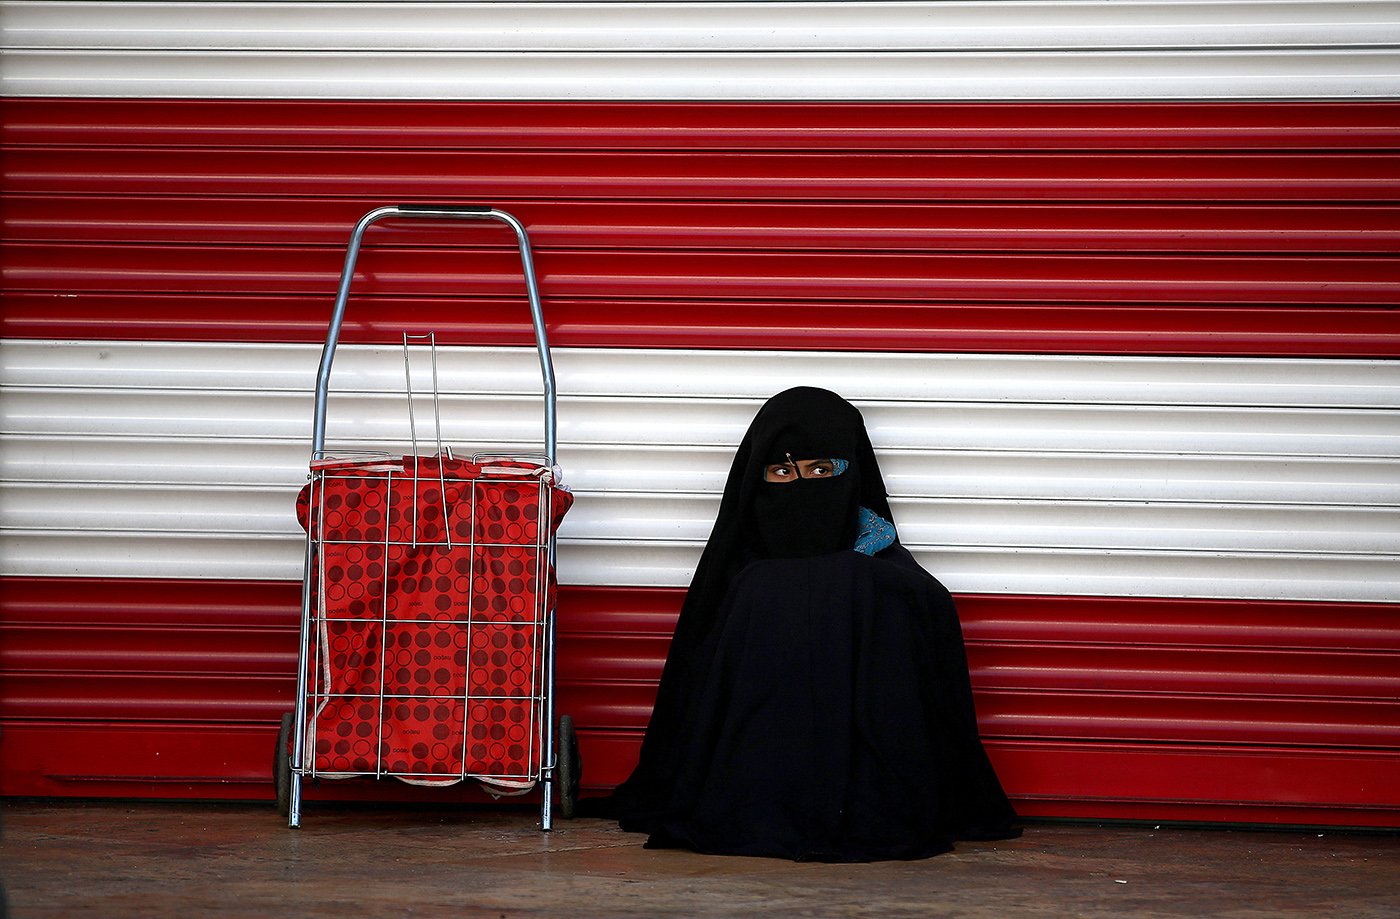 A girl in chador sits next to a closed shop in Sanliurfa, Turkey, 20 June 2018. Turkish President Recep Tayyip Erdogan announced on 18 April 2018 that Turkey will hold snap elections on 24 June 2018. The presidential and parliamentary elections were scheduled to be held in November 2019, but government has decided to change the date following the recommendation of the Nationalist Movement Party (MHP) leader Devlet Bahceli.